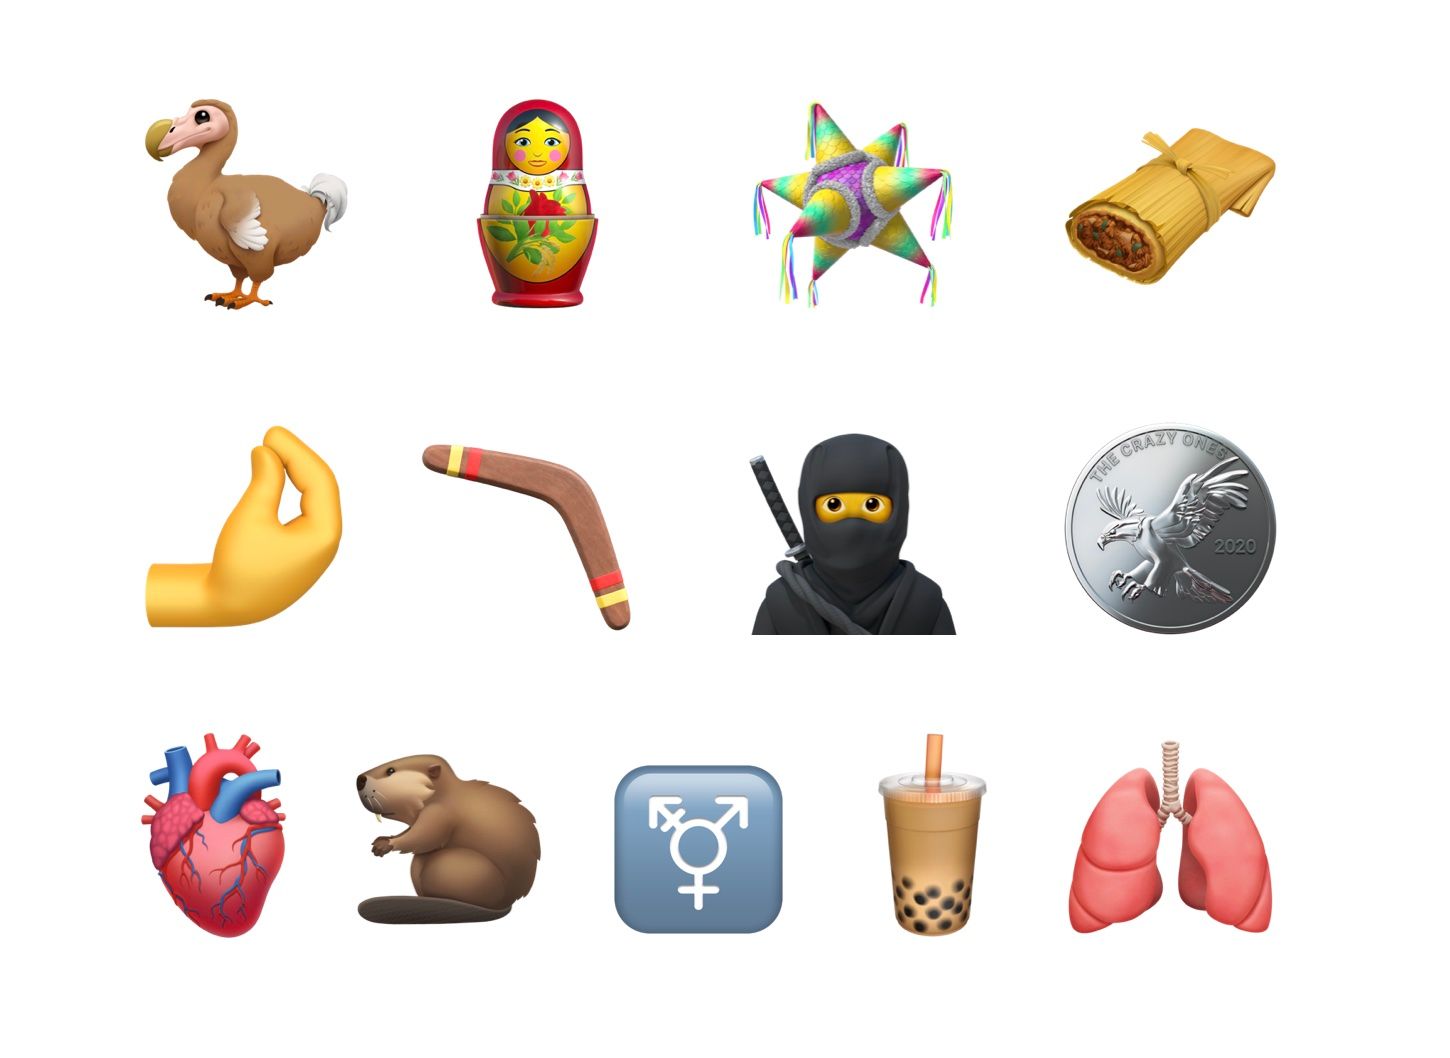 Apple preview of the Emoji 13.0 release coming later in 2020